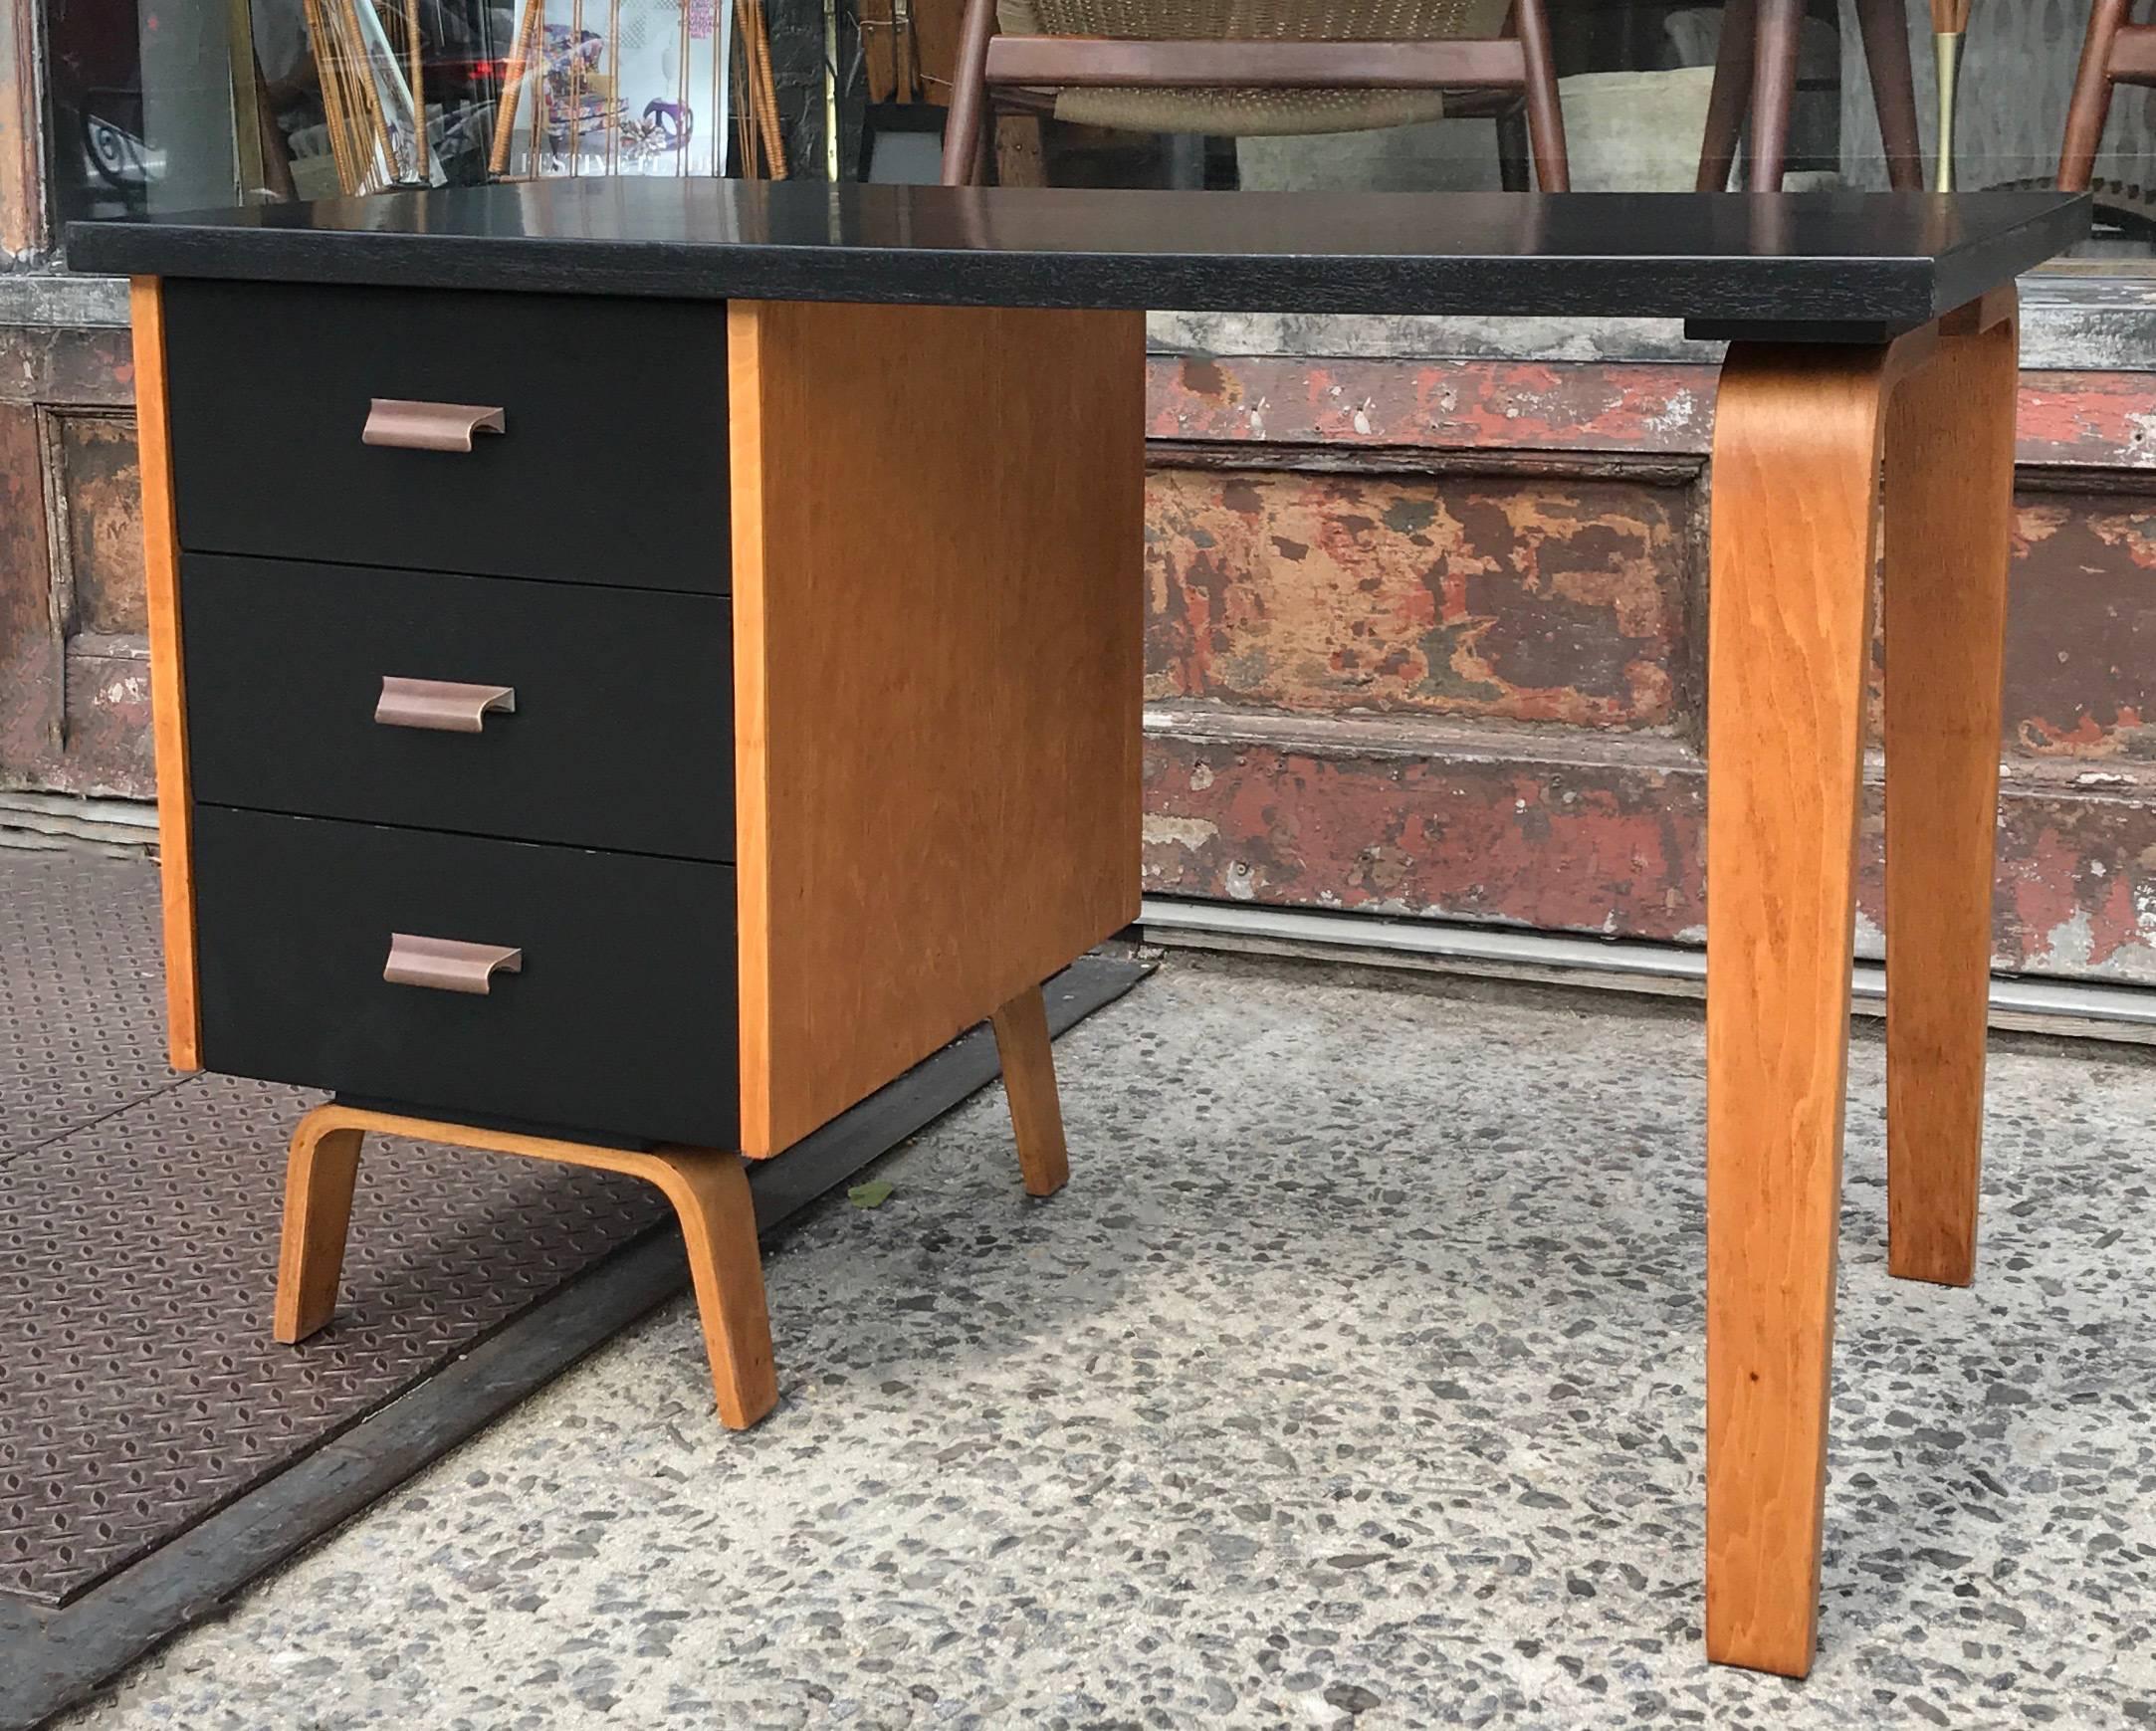 Mid-Century Modern, two-toned, bent-maple-wood, desk by Clifford Pascoe features a black lacquered top and drawers with natural trim and polished copper pulls.